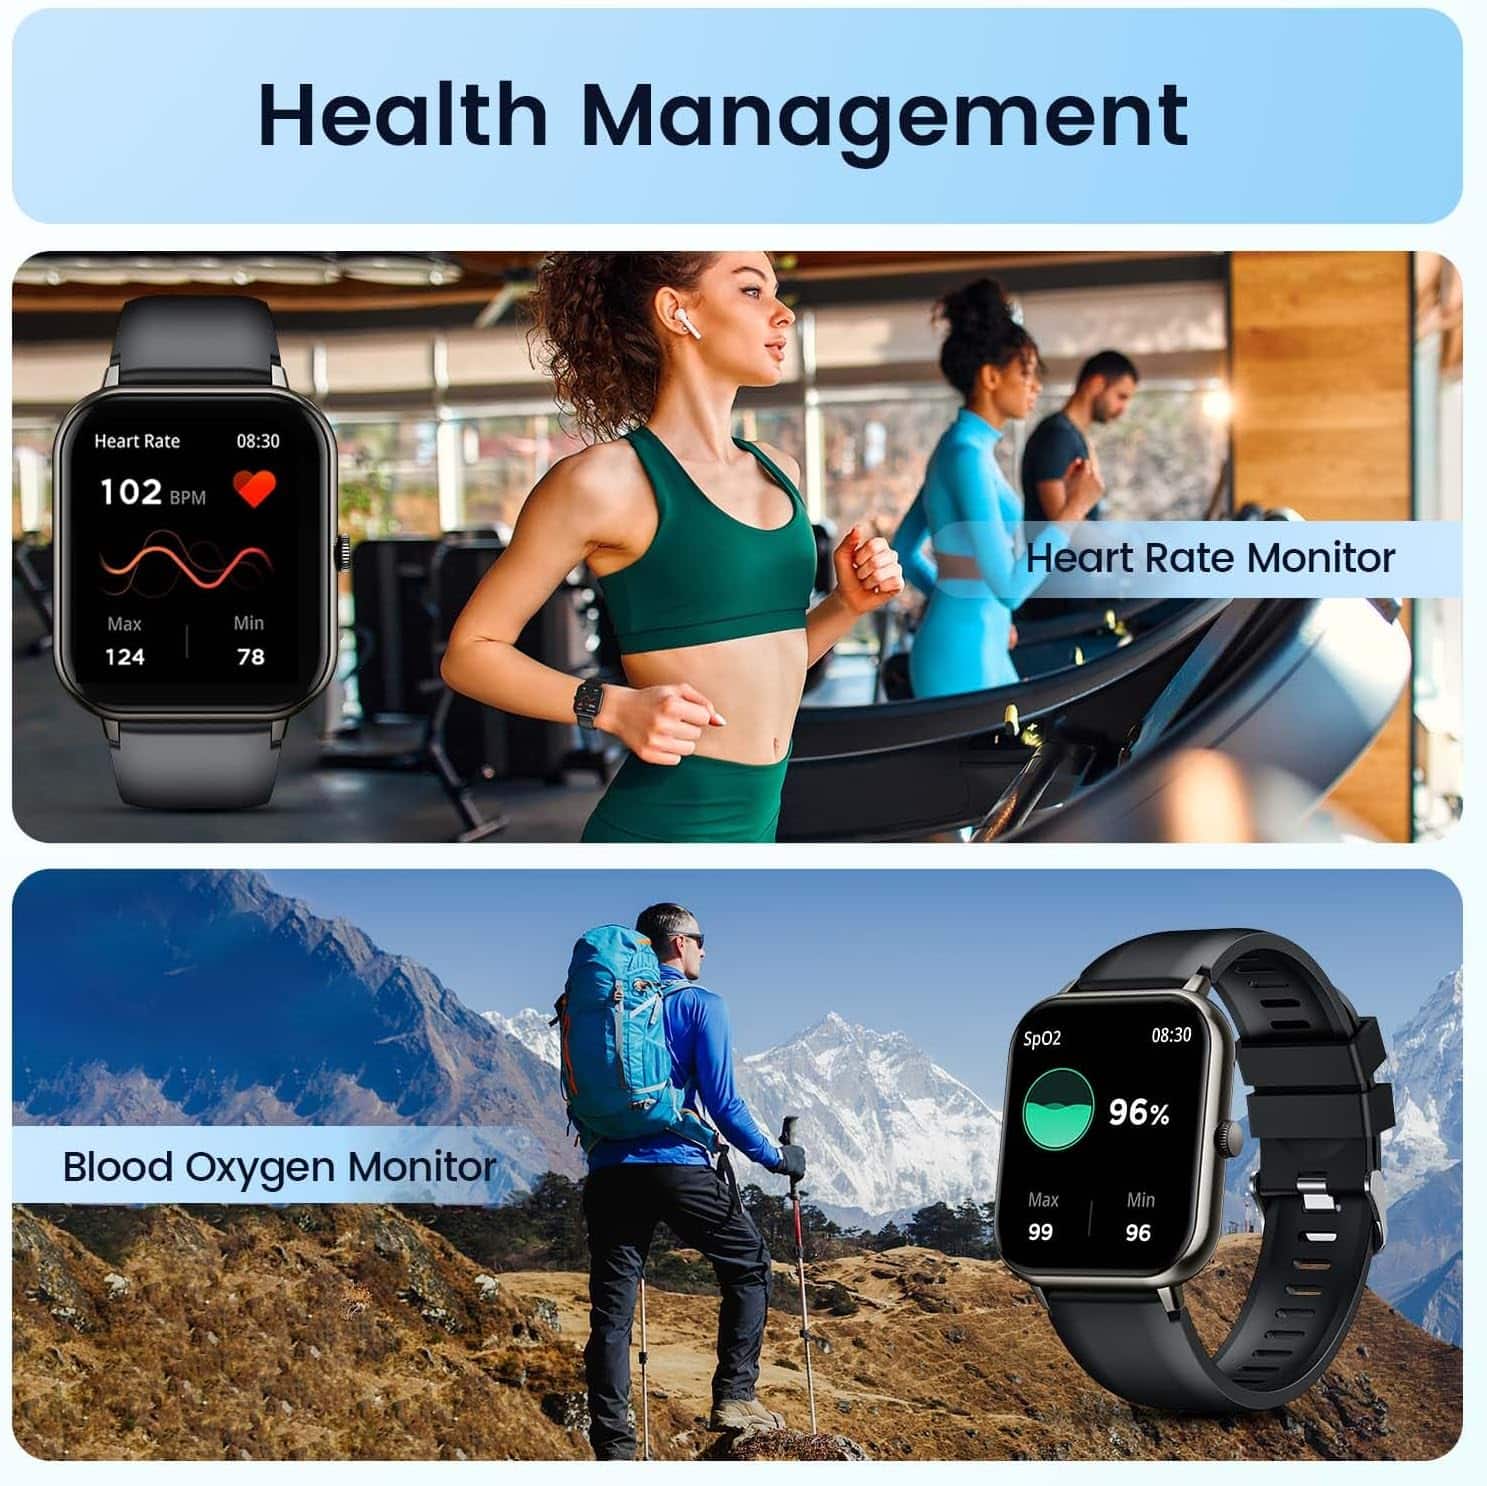 TAOPON Smartwatch for Men Women Fitness Tracker: A Comprehensive Review